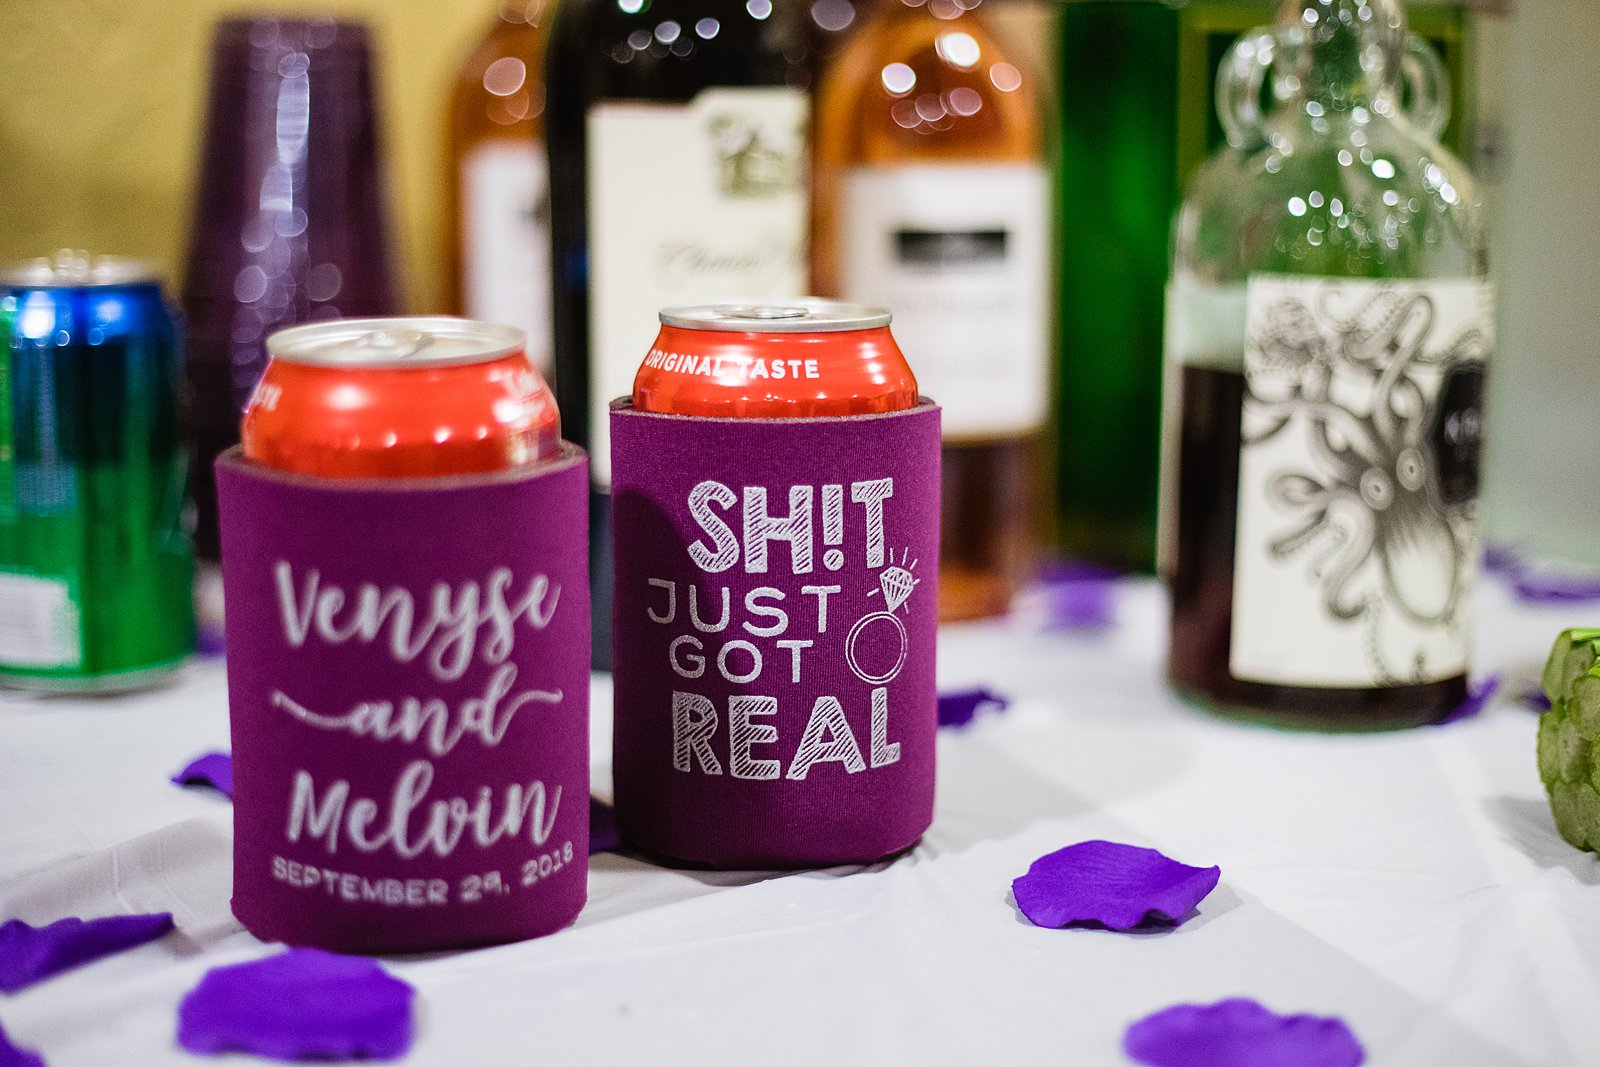 Shit just got real wedding favor koozies by Phoenix wedding photographer by PMA Photography.